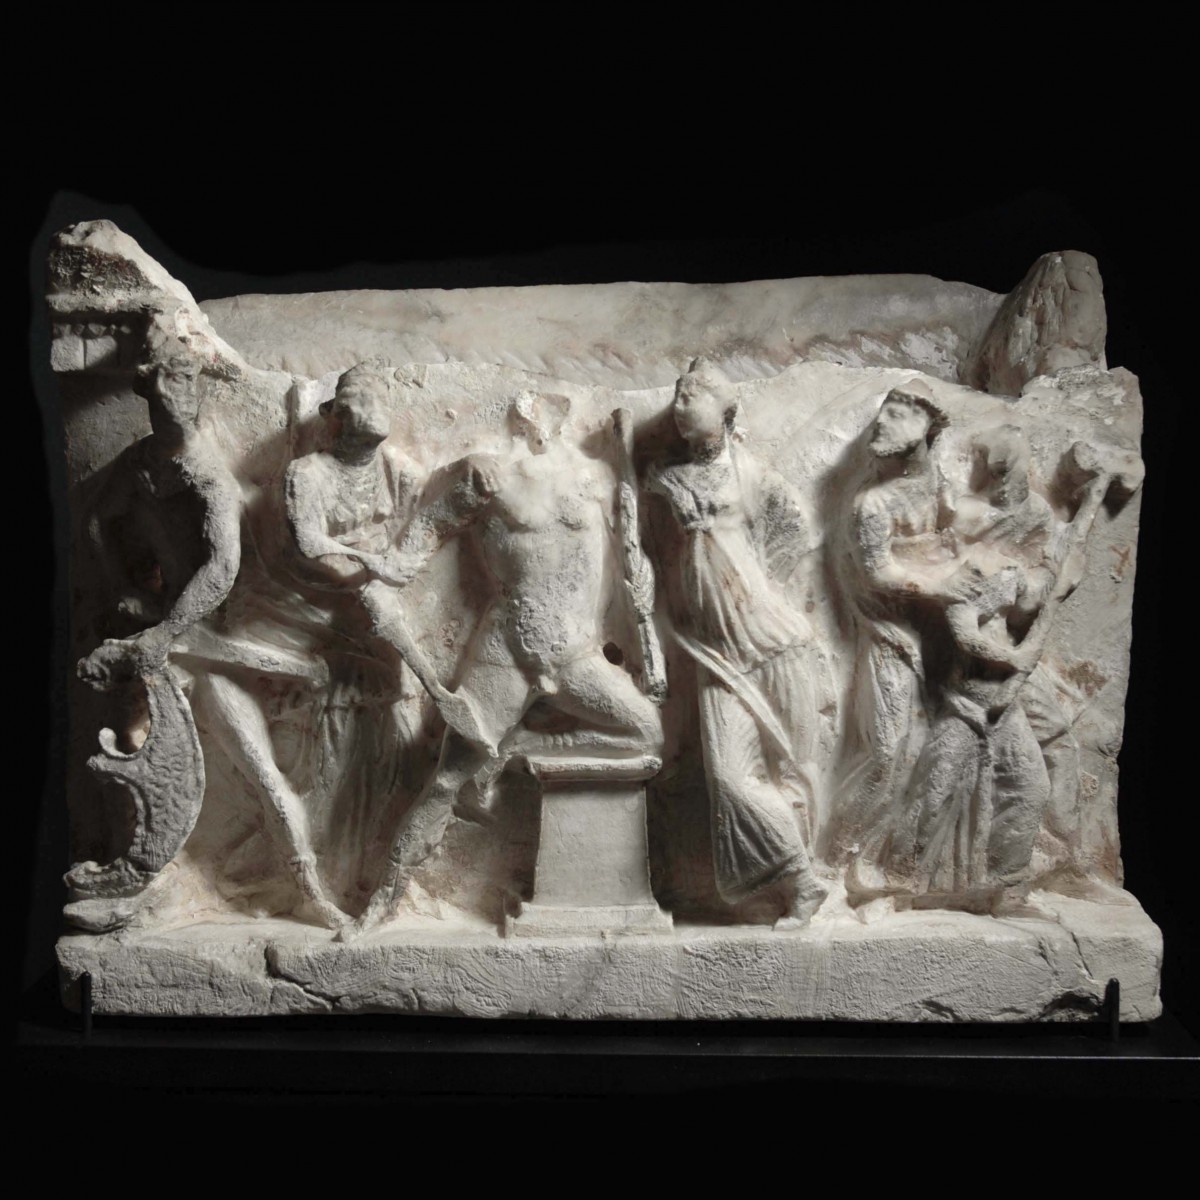 Etruscan alabaster cinerary urn showing the recognition of Paris front